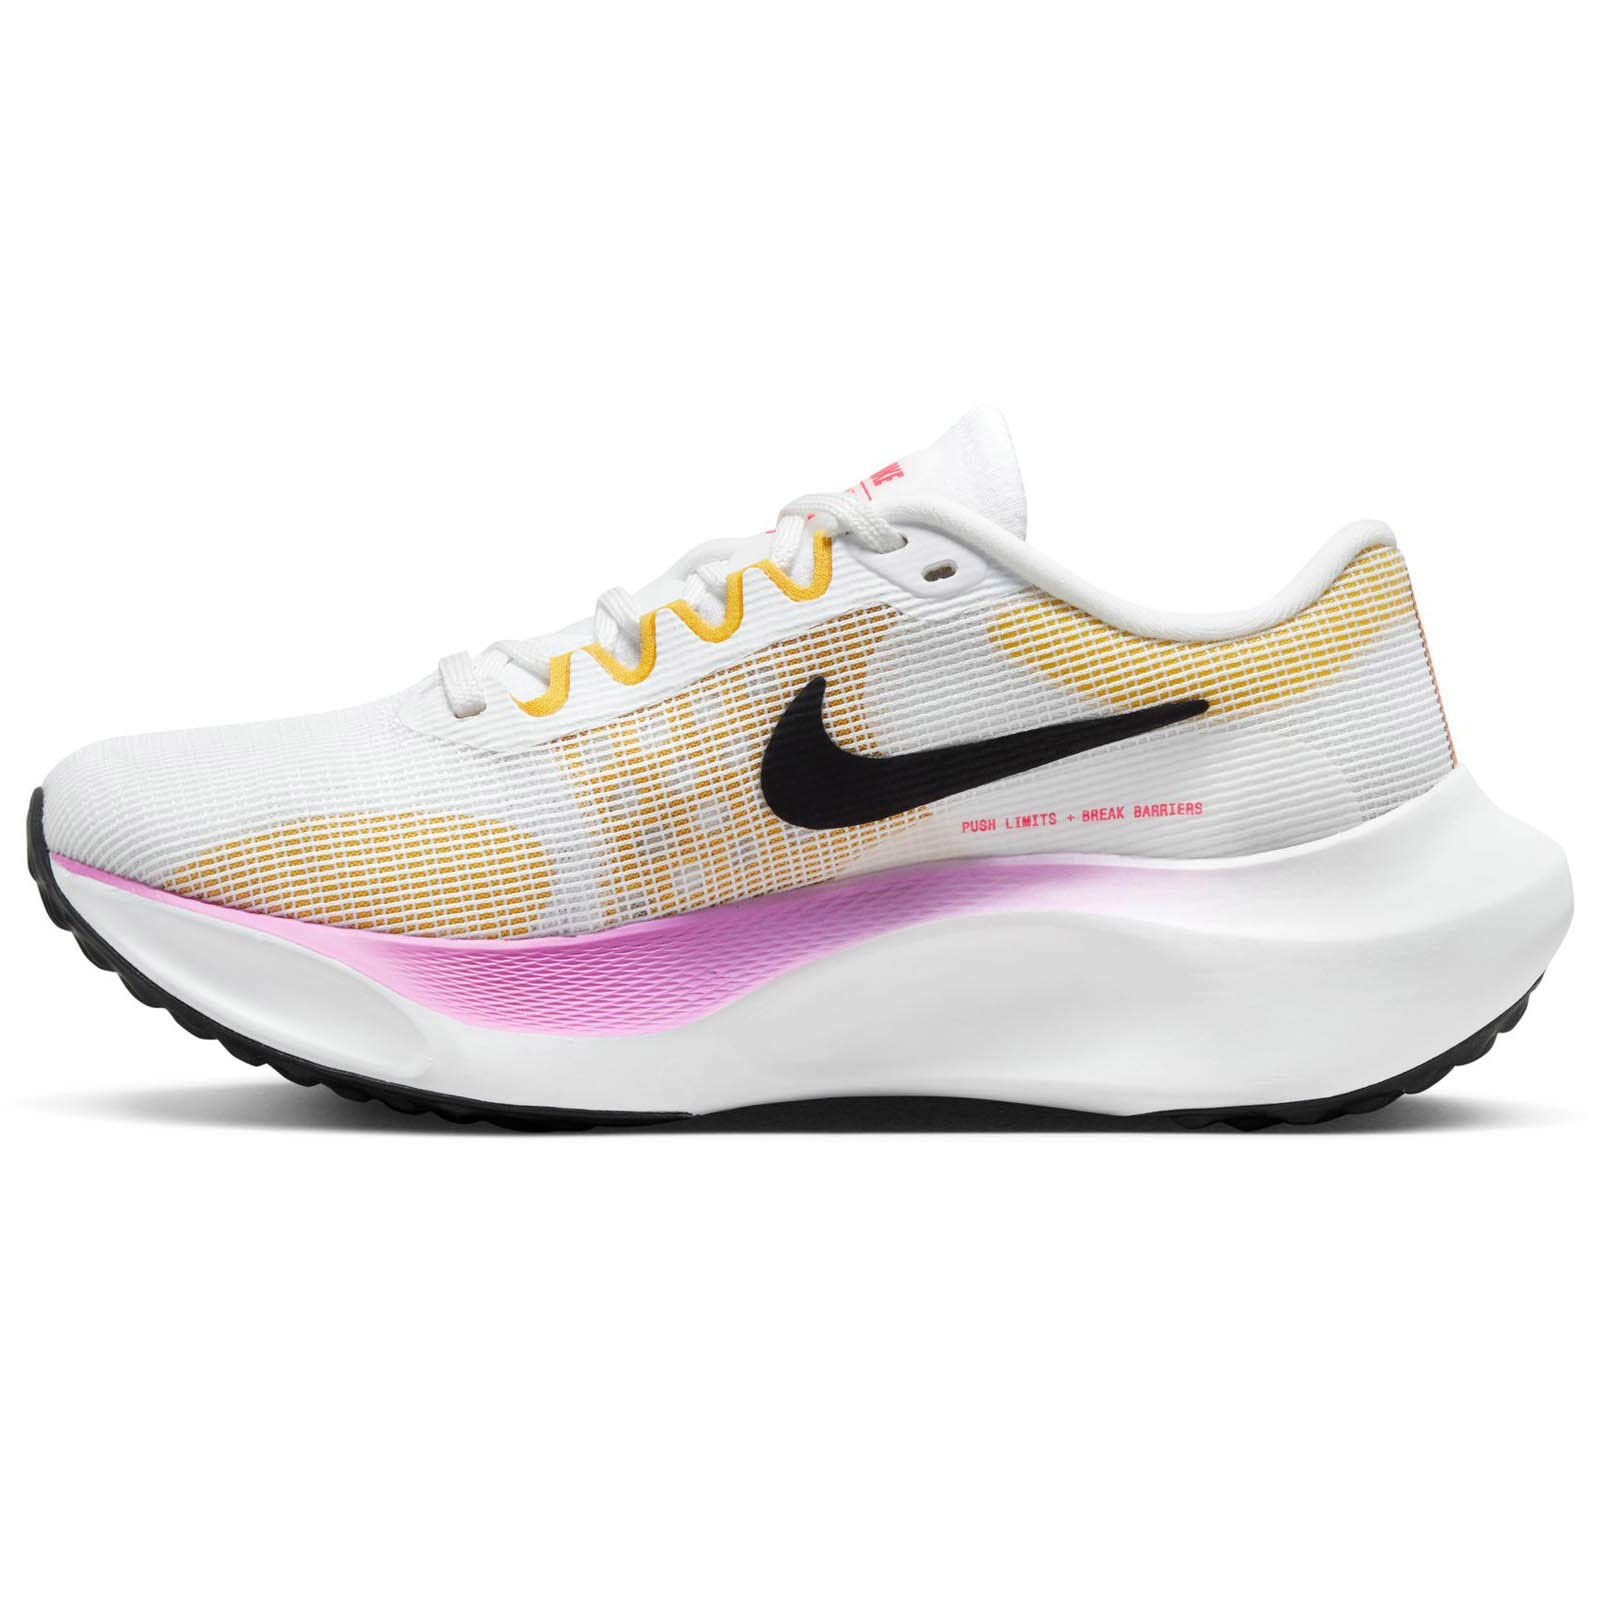 NIKE ZOOM FLY 5 WOMENS ROAD RUNNING SHOES